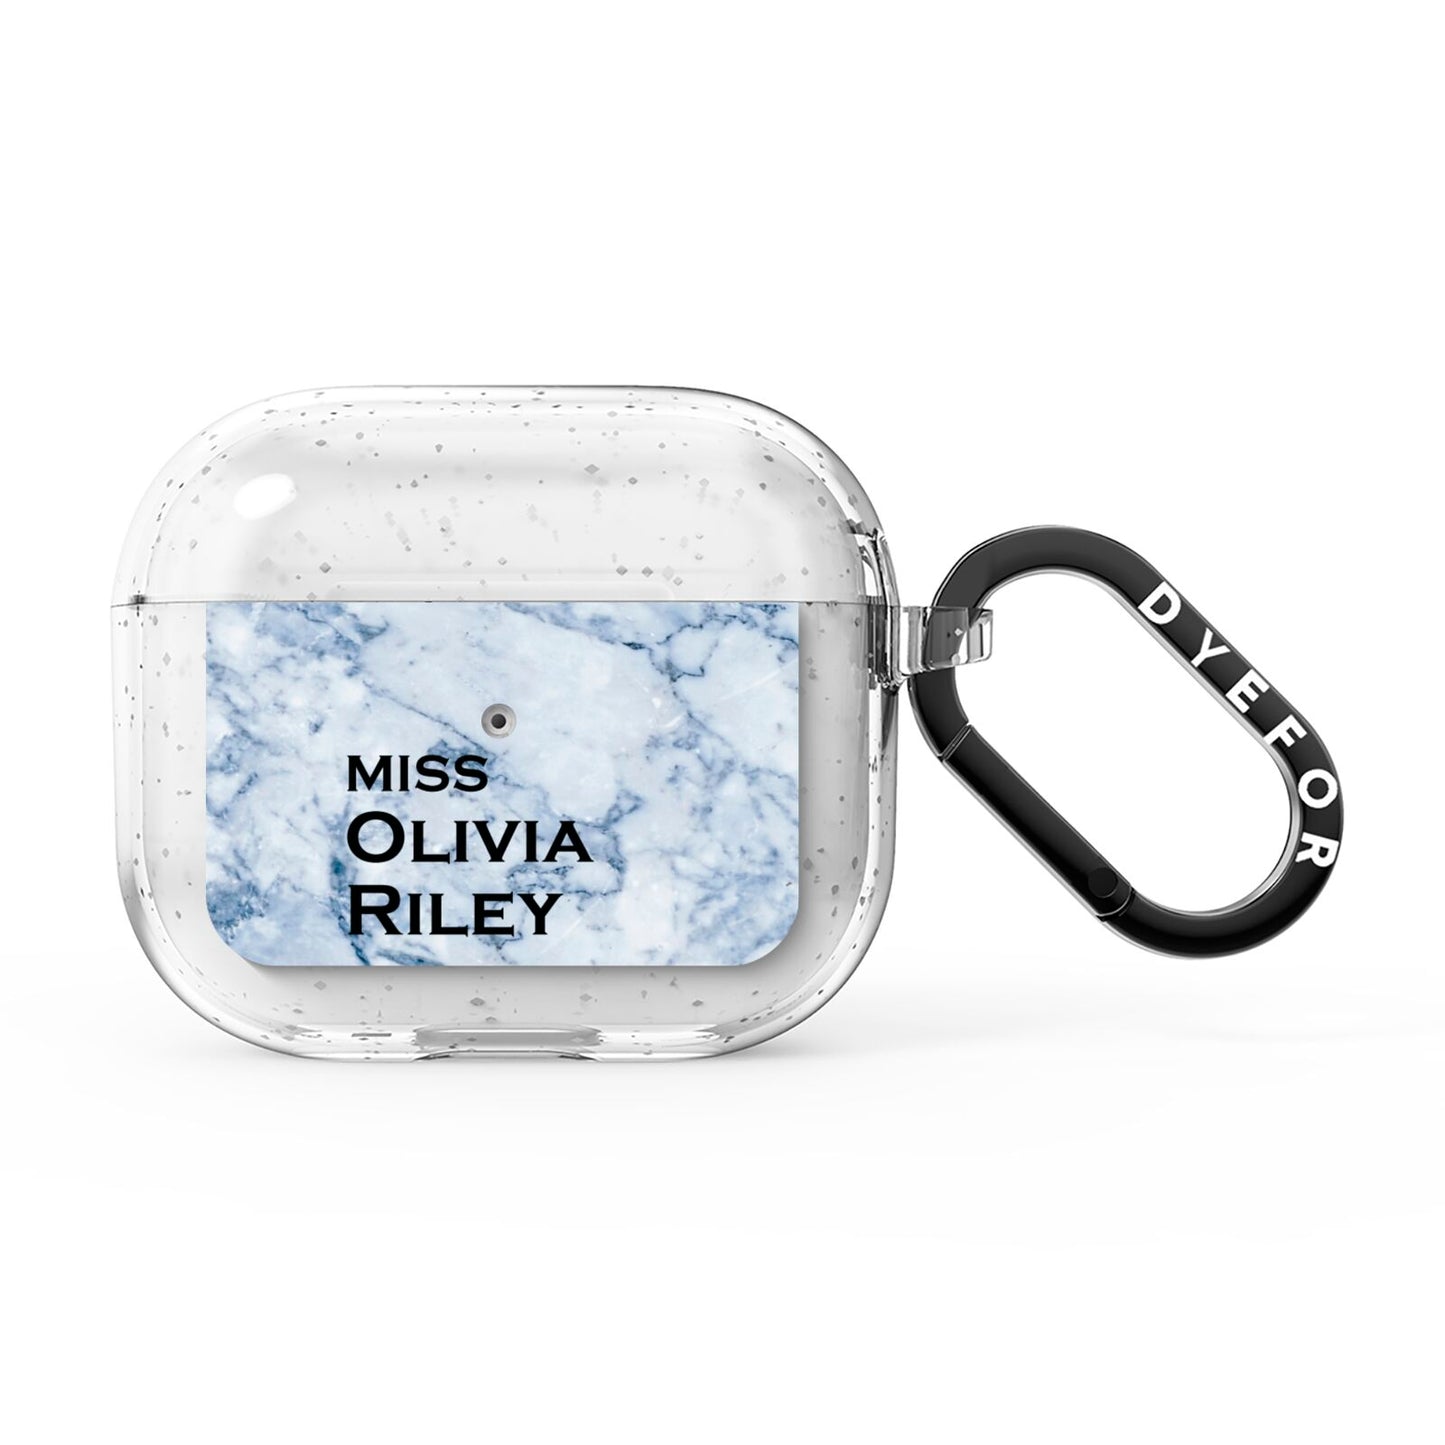 Full Name Grey Marble AirPods Glitter Case 3rd Gen